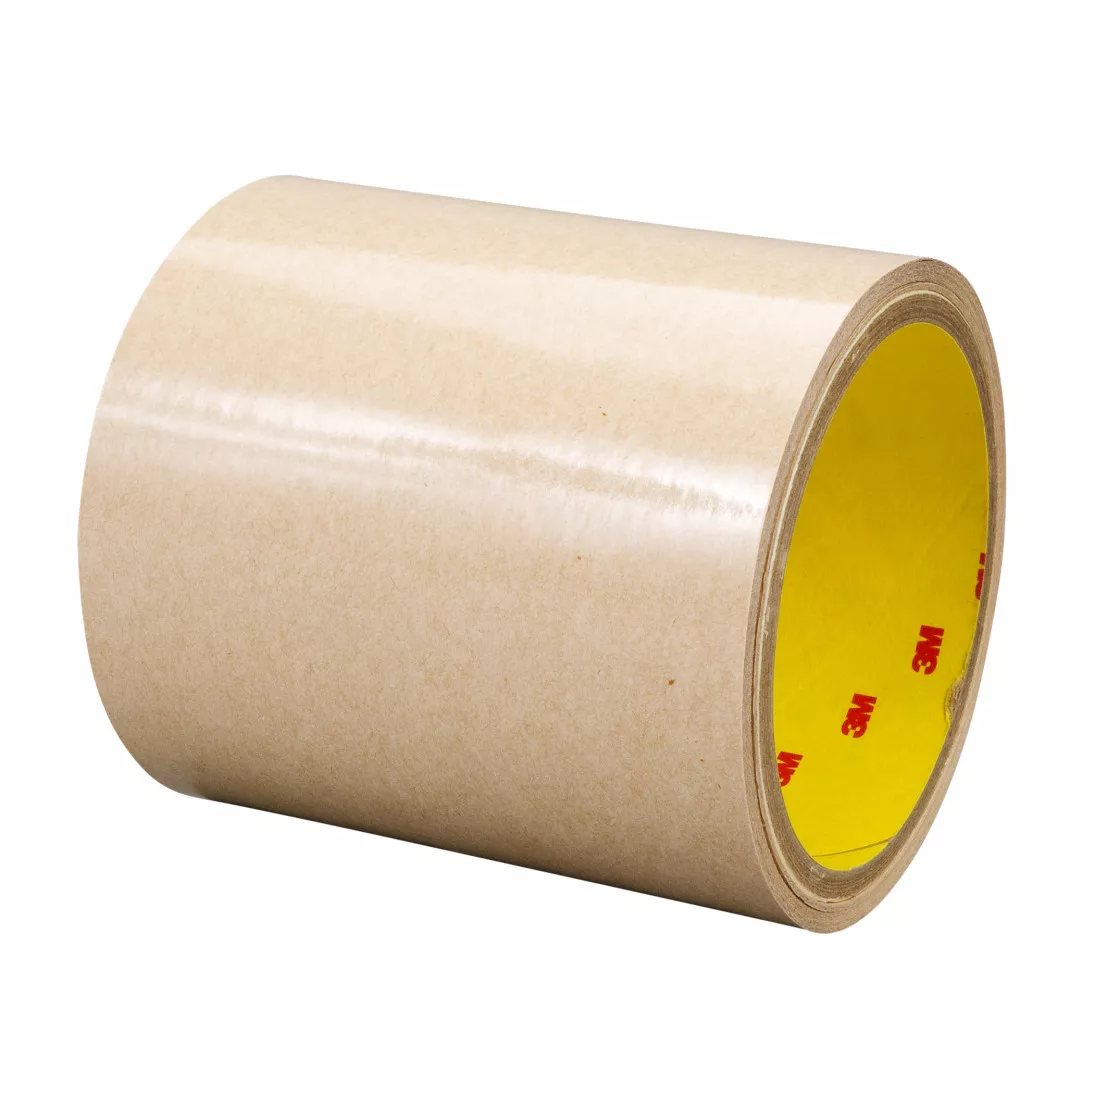 3M™ Adhesive Transfer Tape 9626, Clear, 48 in x 180 yd, 2 mil, 1 roll per case